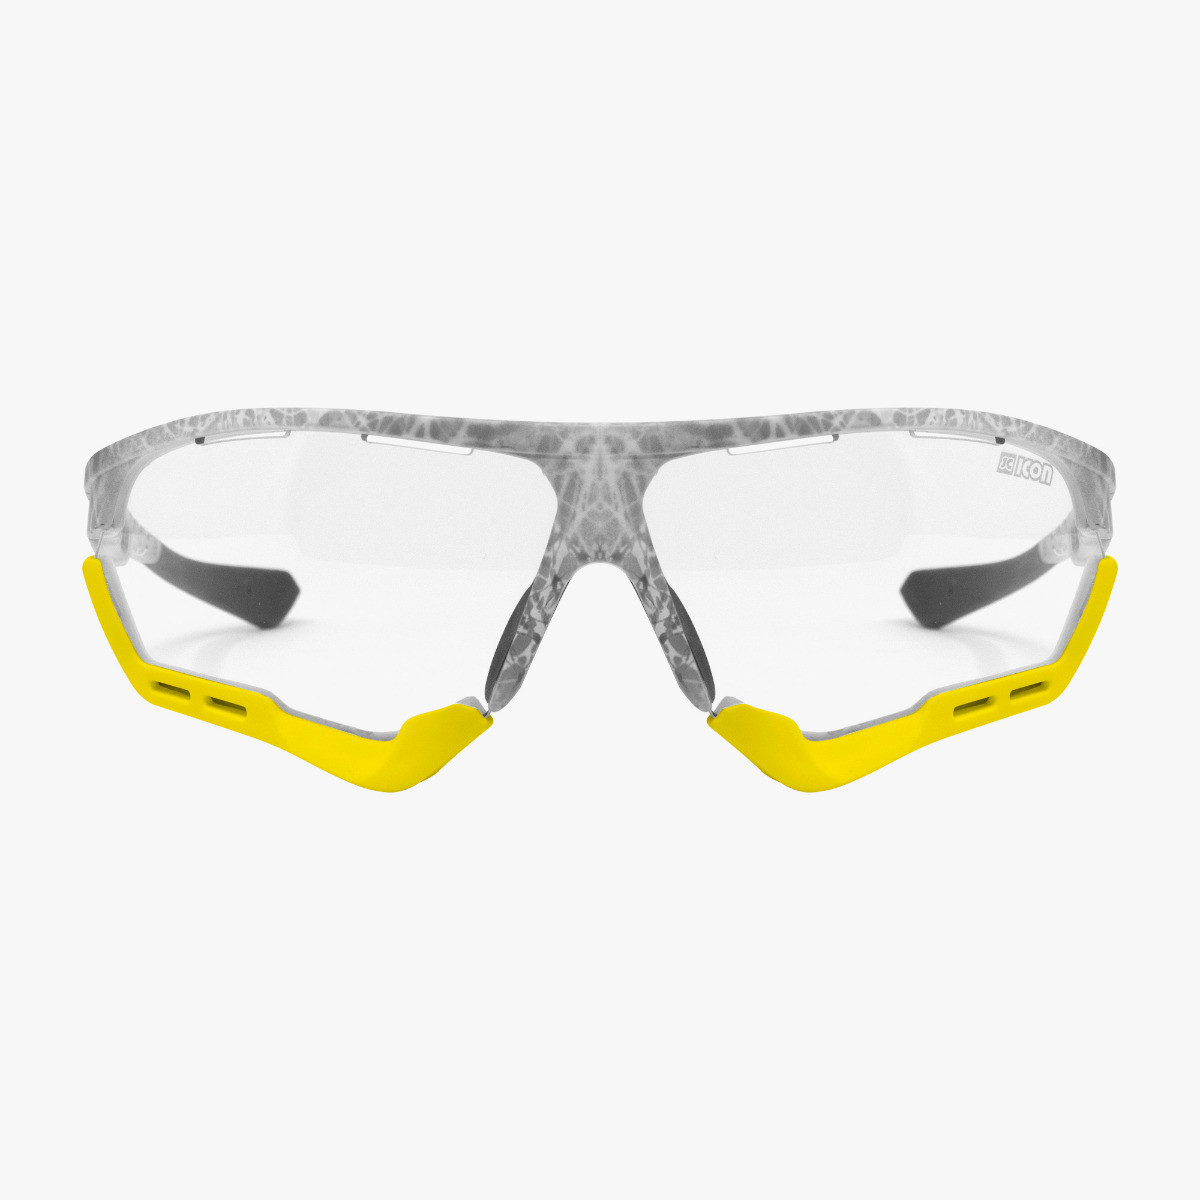 Scicon Sports | Aerocomfort Sport Cycling Performance Sunglasses - Frozen White / Photocromatic Silver - EY15180505